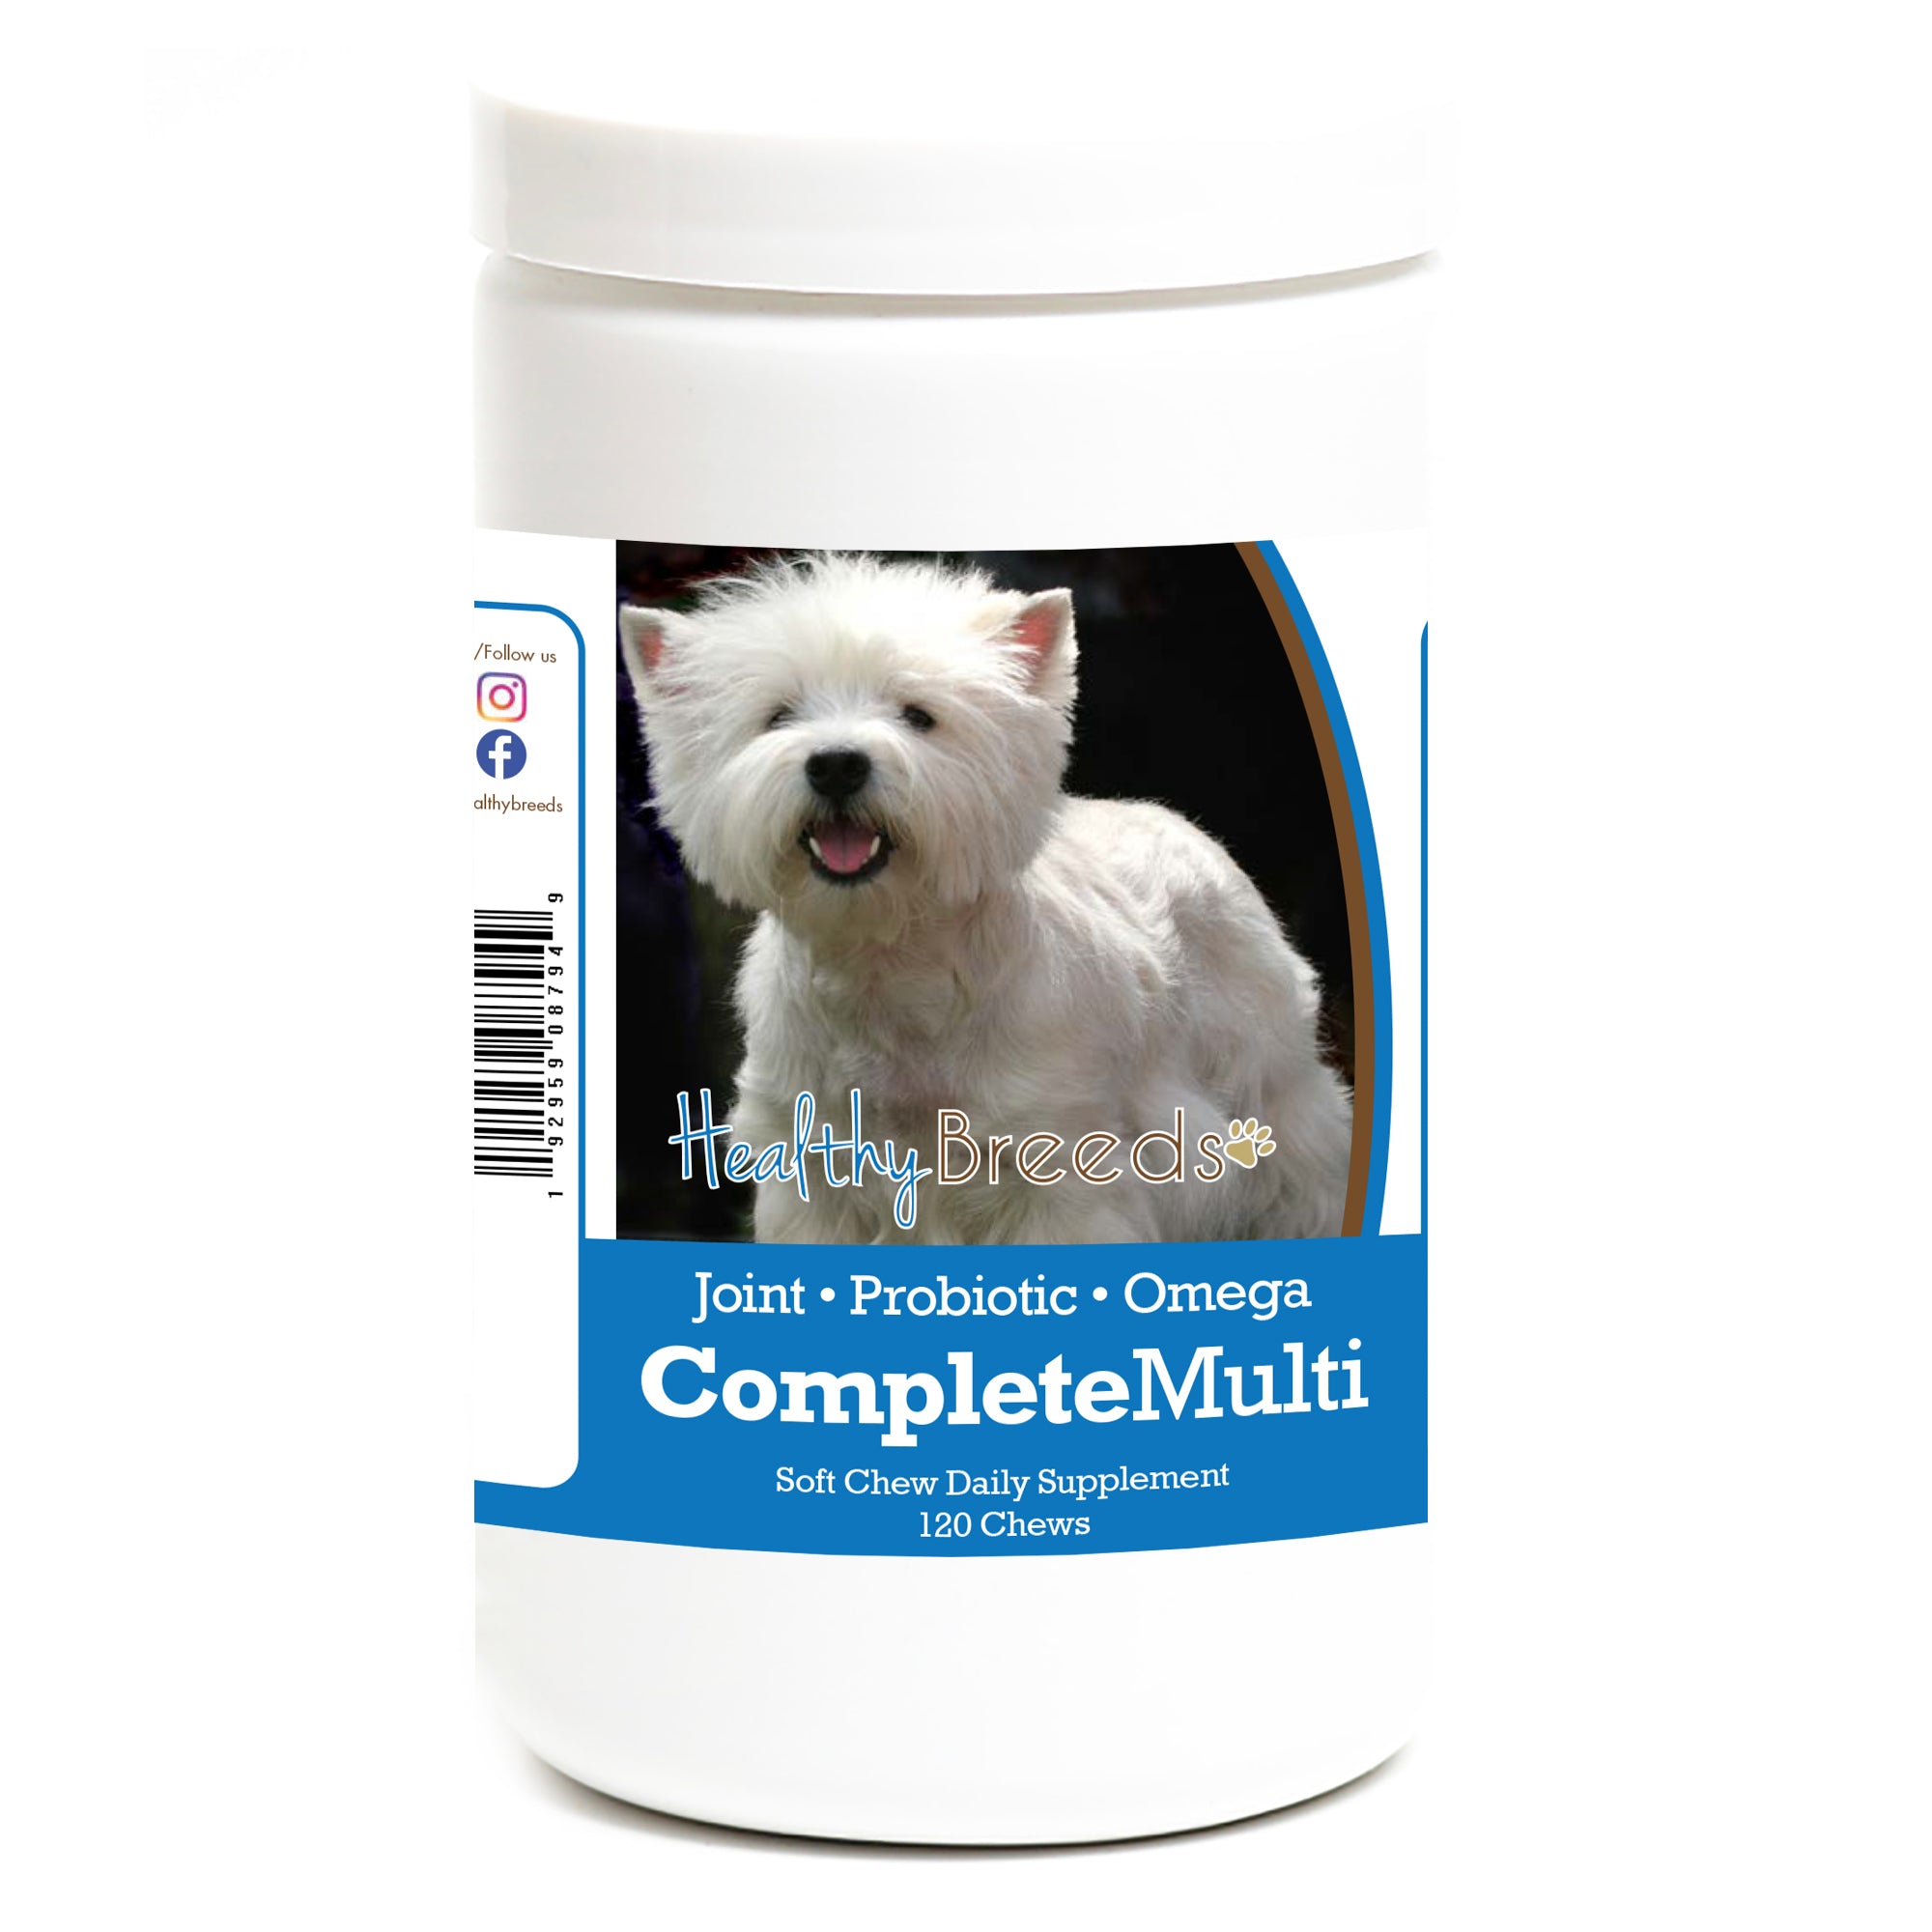 West Highland White Terrier All In One Multivitamin Soft Chew 120 Count